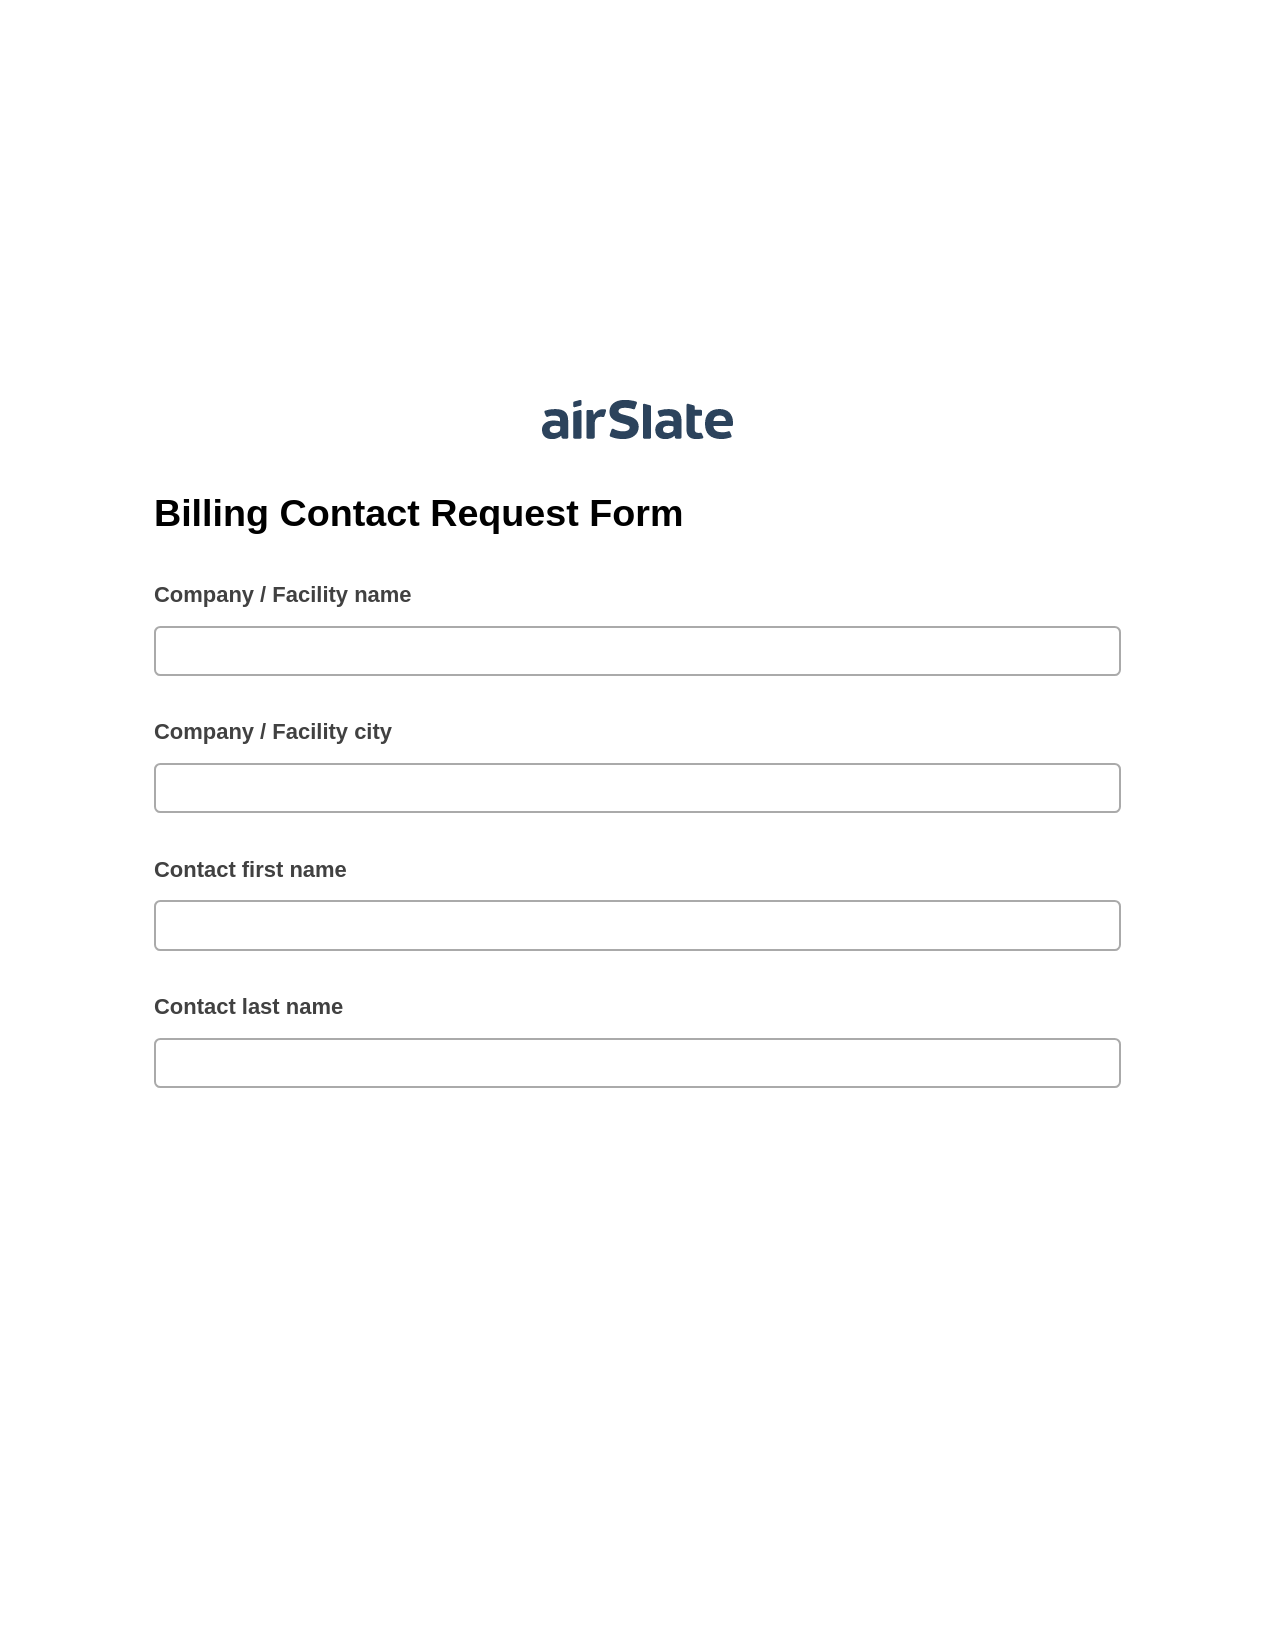 Multirole Billing Contact Request Form Pre-fill from Salesforce Record Bot, SendGrid send Campaign bot, Export to Salesforce Bot